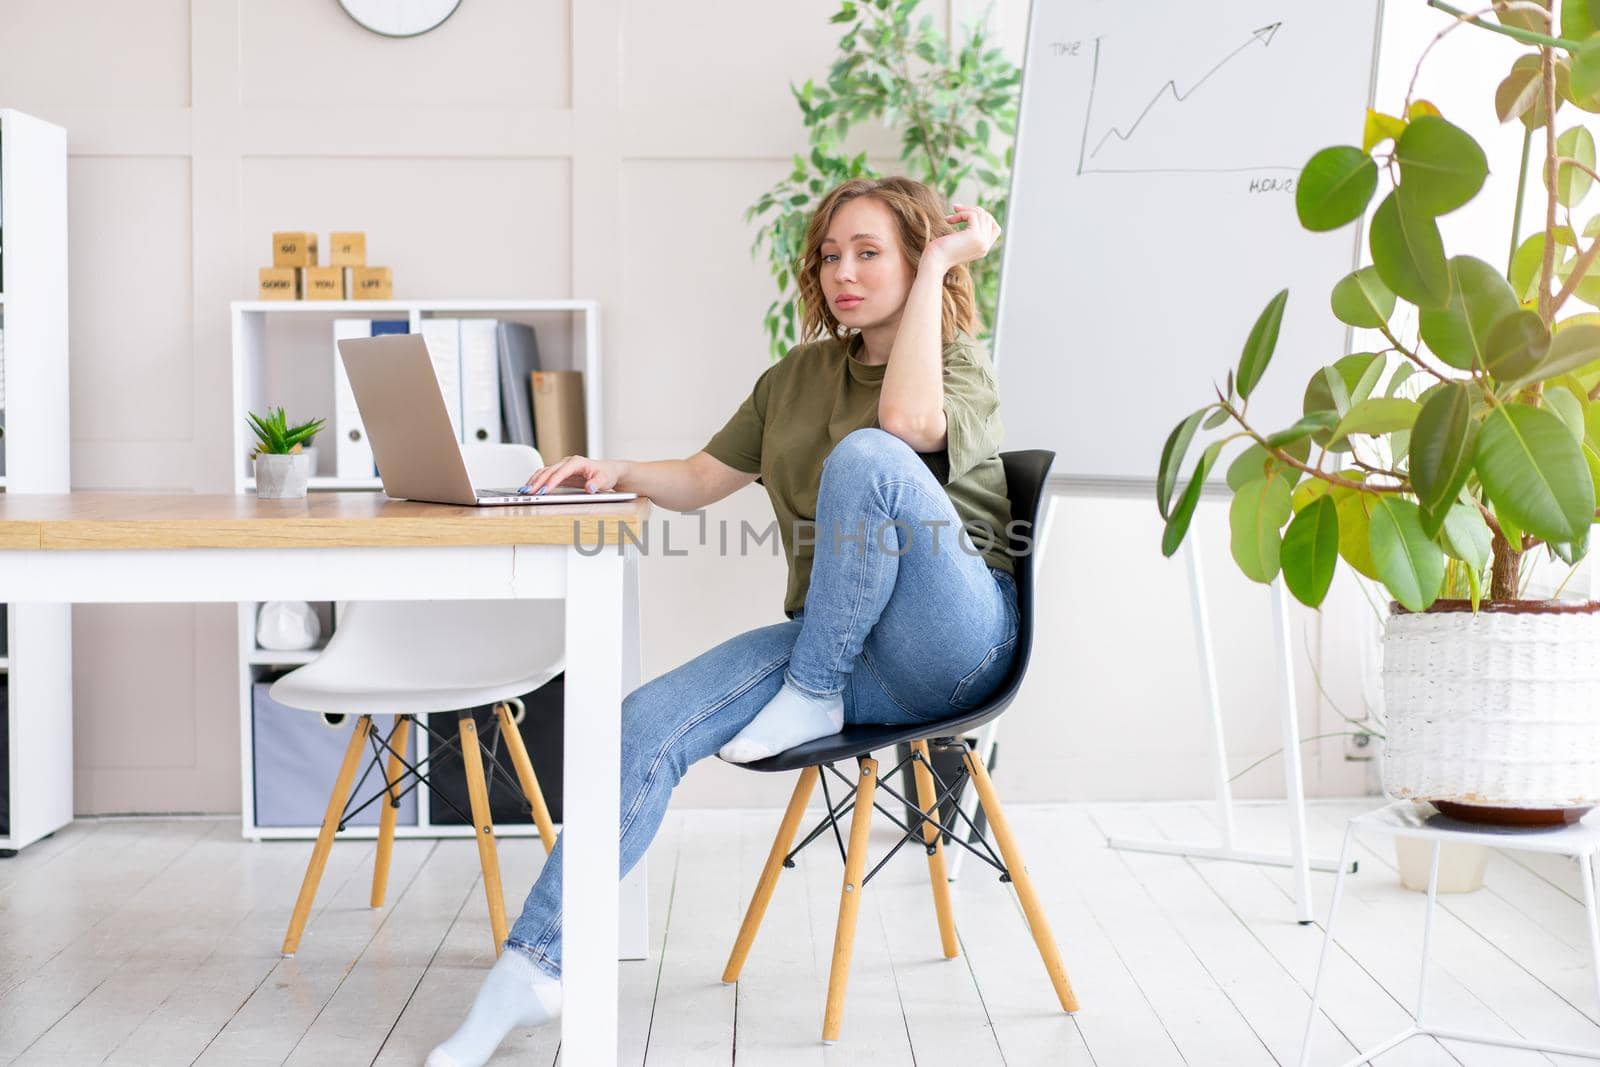 Business woman using laptop sitting desk white office interior with houseplant looking Business people Business person Online, Young and successful Dresed green shirt blue jeans barefoot relaxing